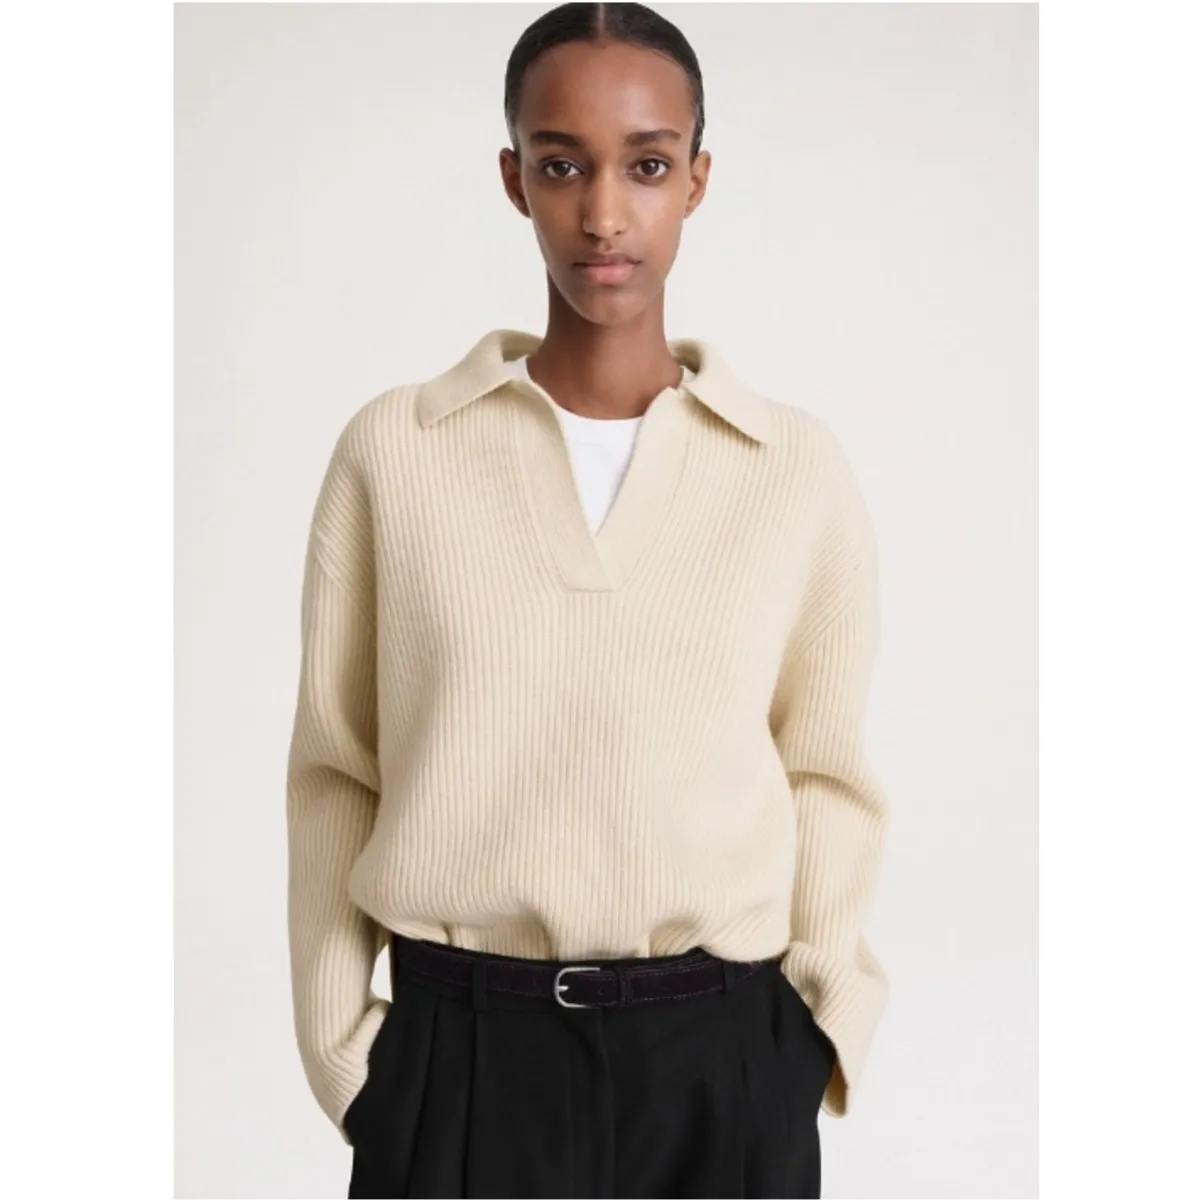 

Nordic niche autumn 23 Tot * m ribbed POLO collar lazy and slim knit sweater sweater